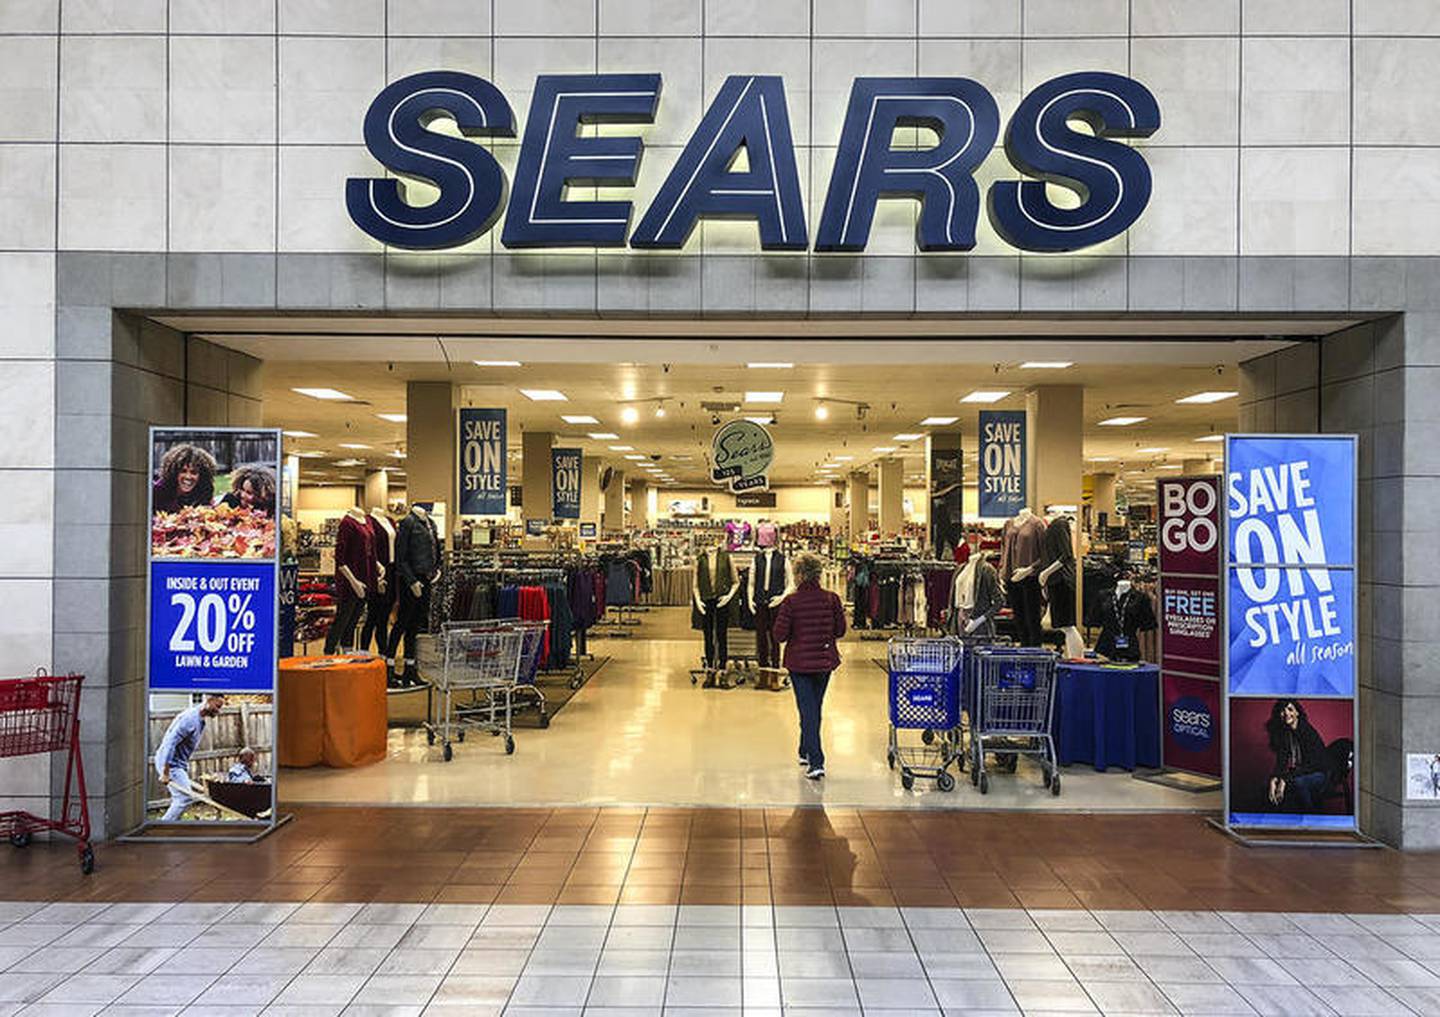 Sears at the Louis Joliet Mall in Joliet announced Monday that it will close near the end of the year. The announcement came shortly after Sears Holdings filed for Chapter 11 bankruptcy Monday.